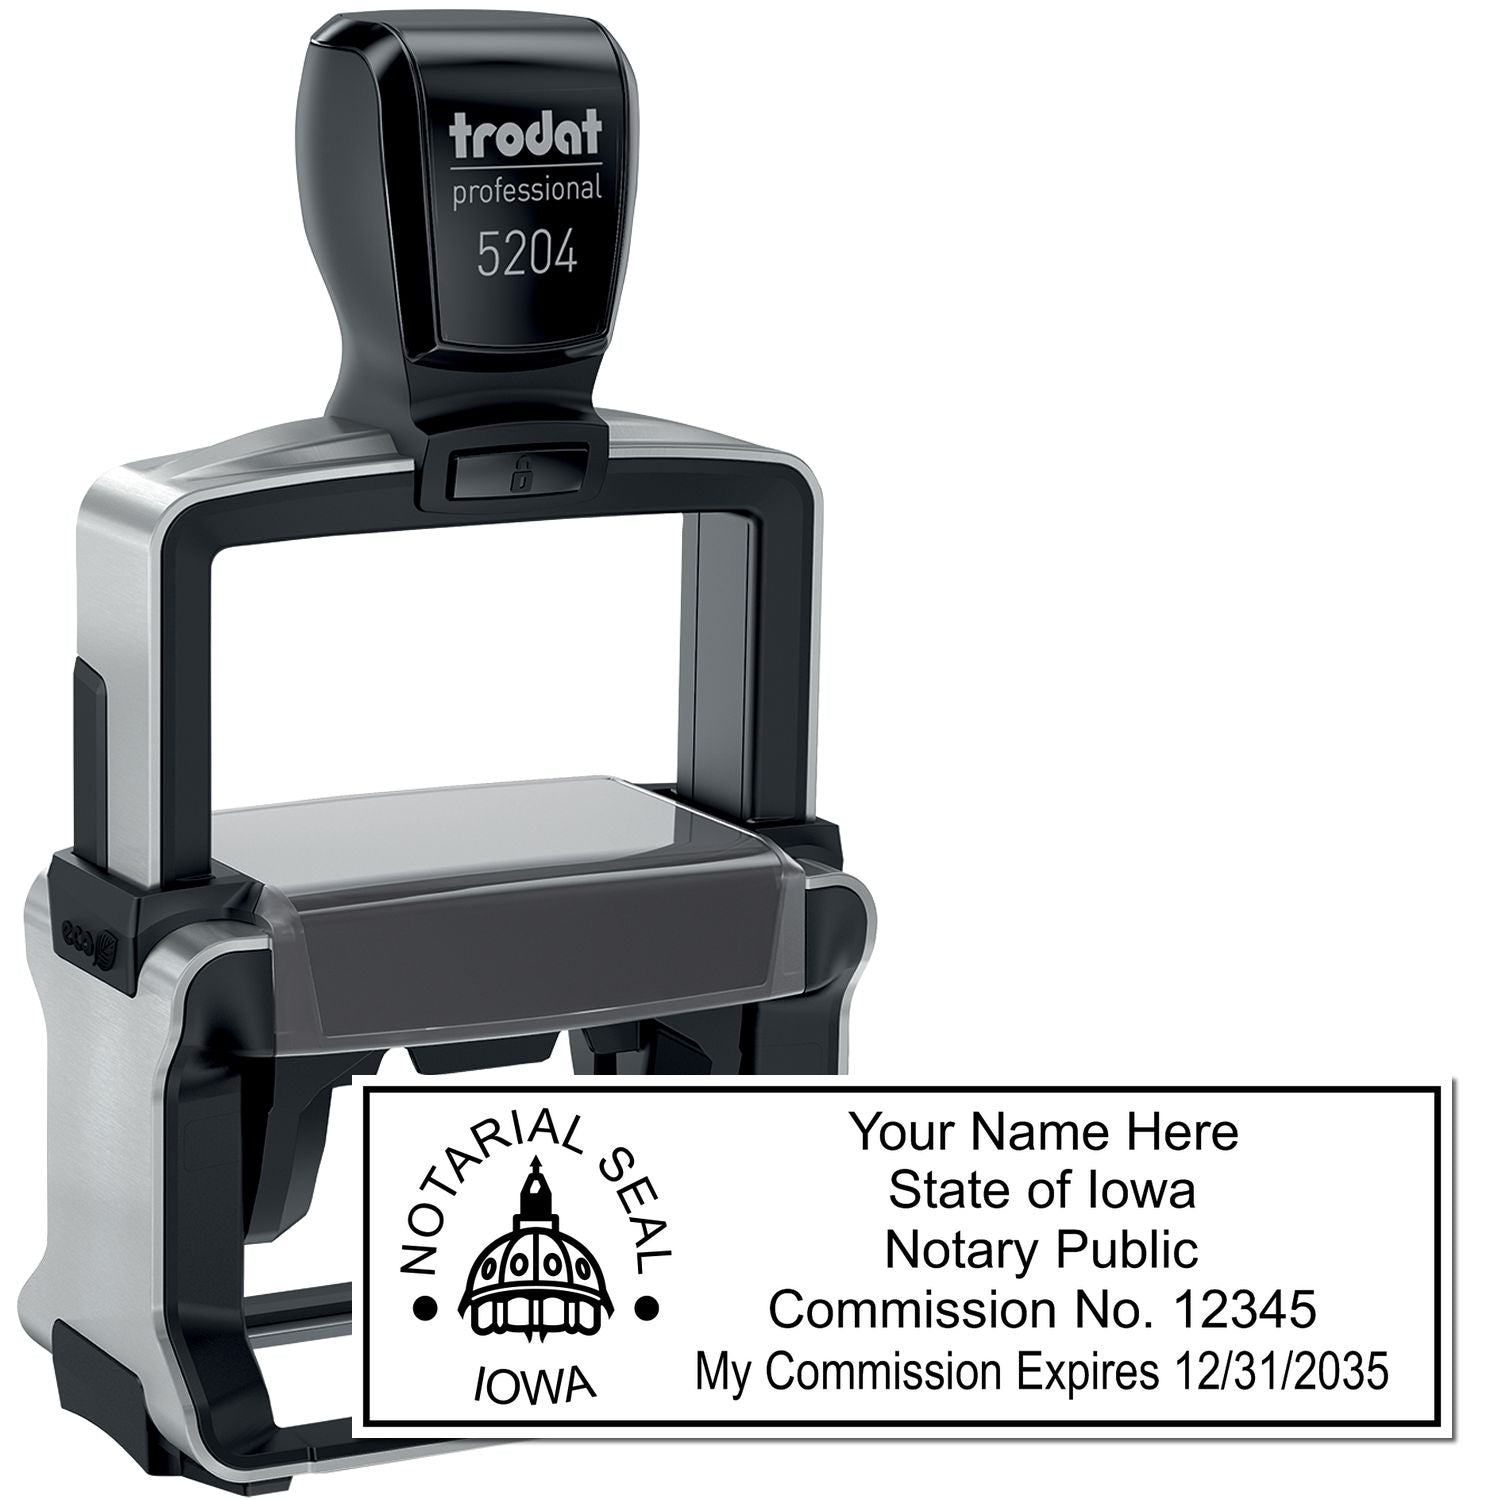 The main image for the Heavy-Duty Iowa Rectangular Notary Stamp depicting a sample of the imprint and electronic files